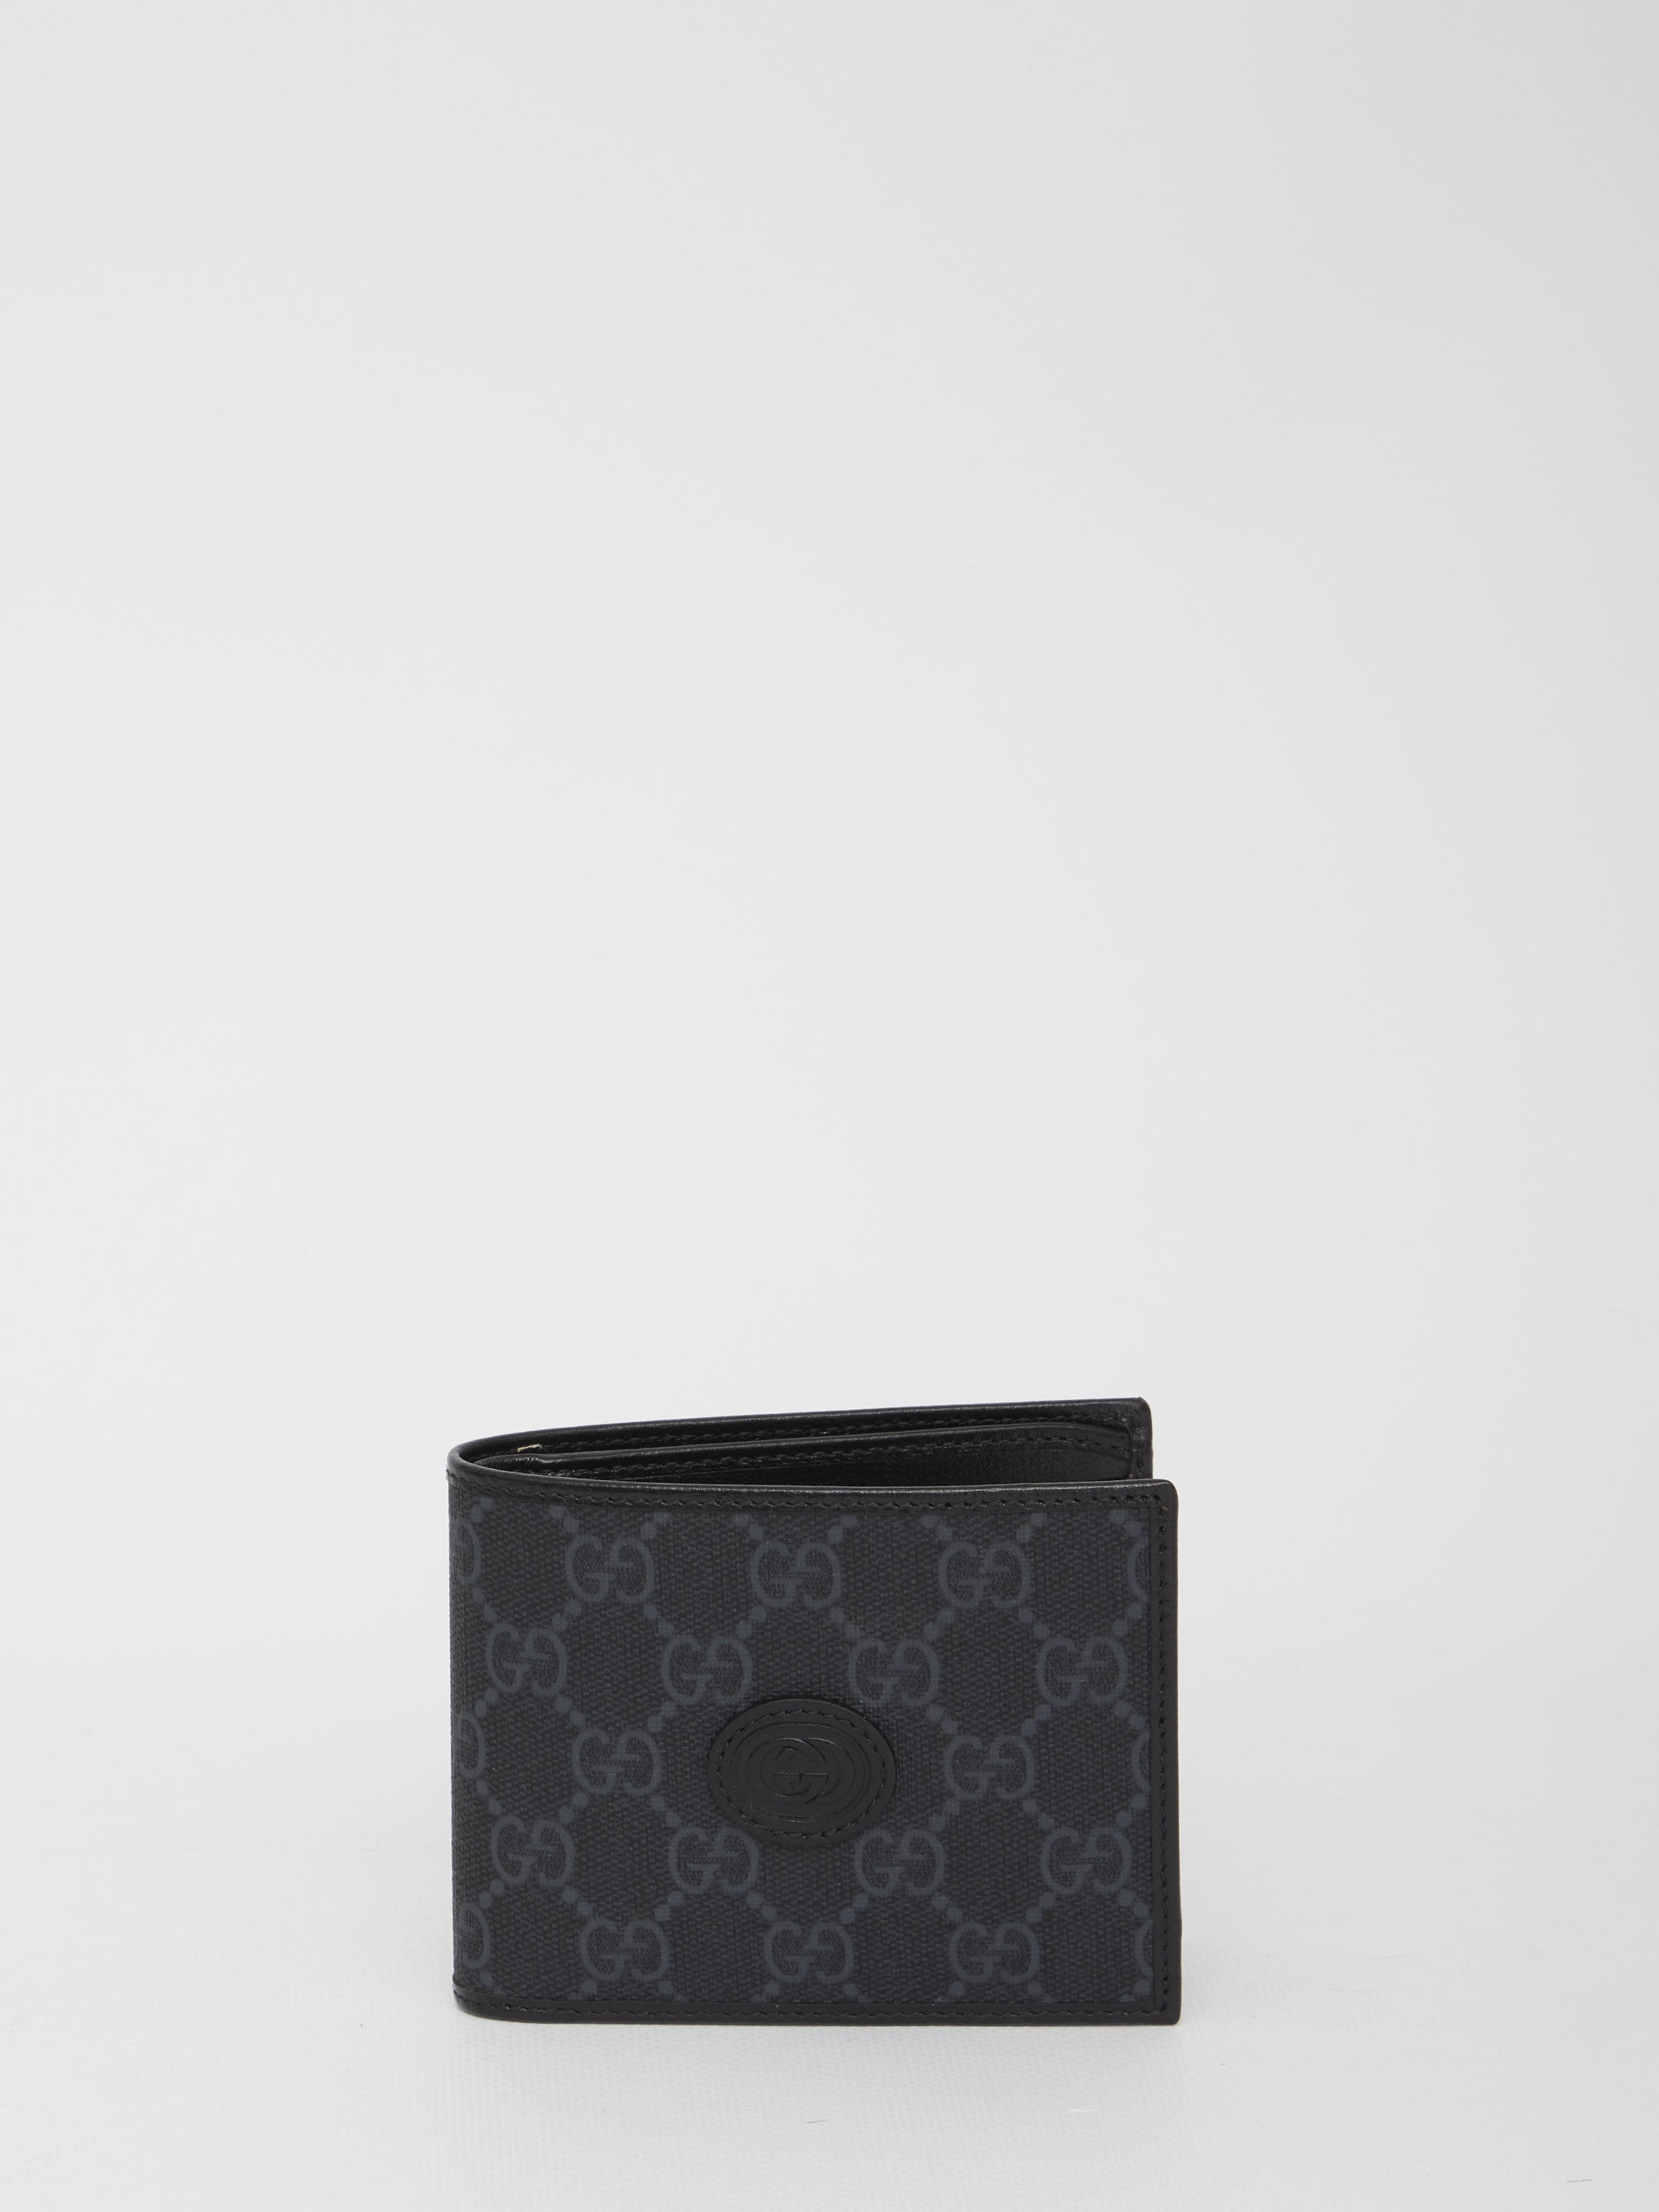 GUCCI-OUTLET-SALE-GG-fabric-wallet-Taschen-QT-BLACK-ARCHIVE-COLLECTION.jpg